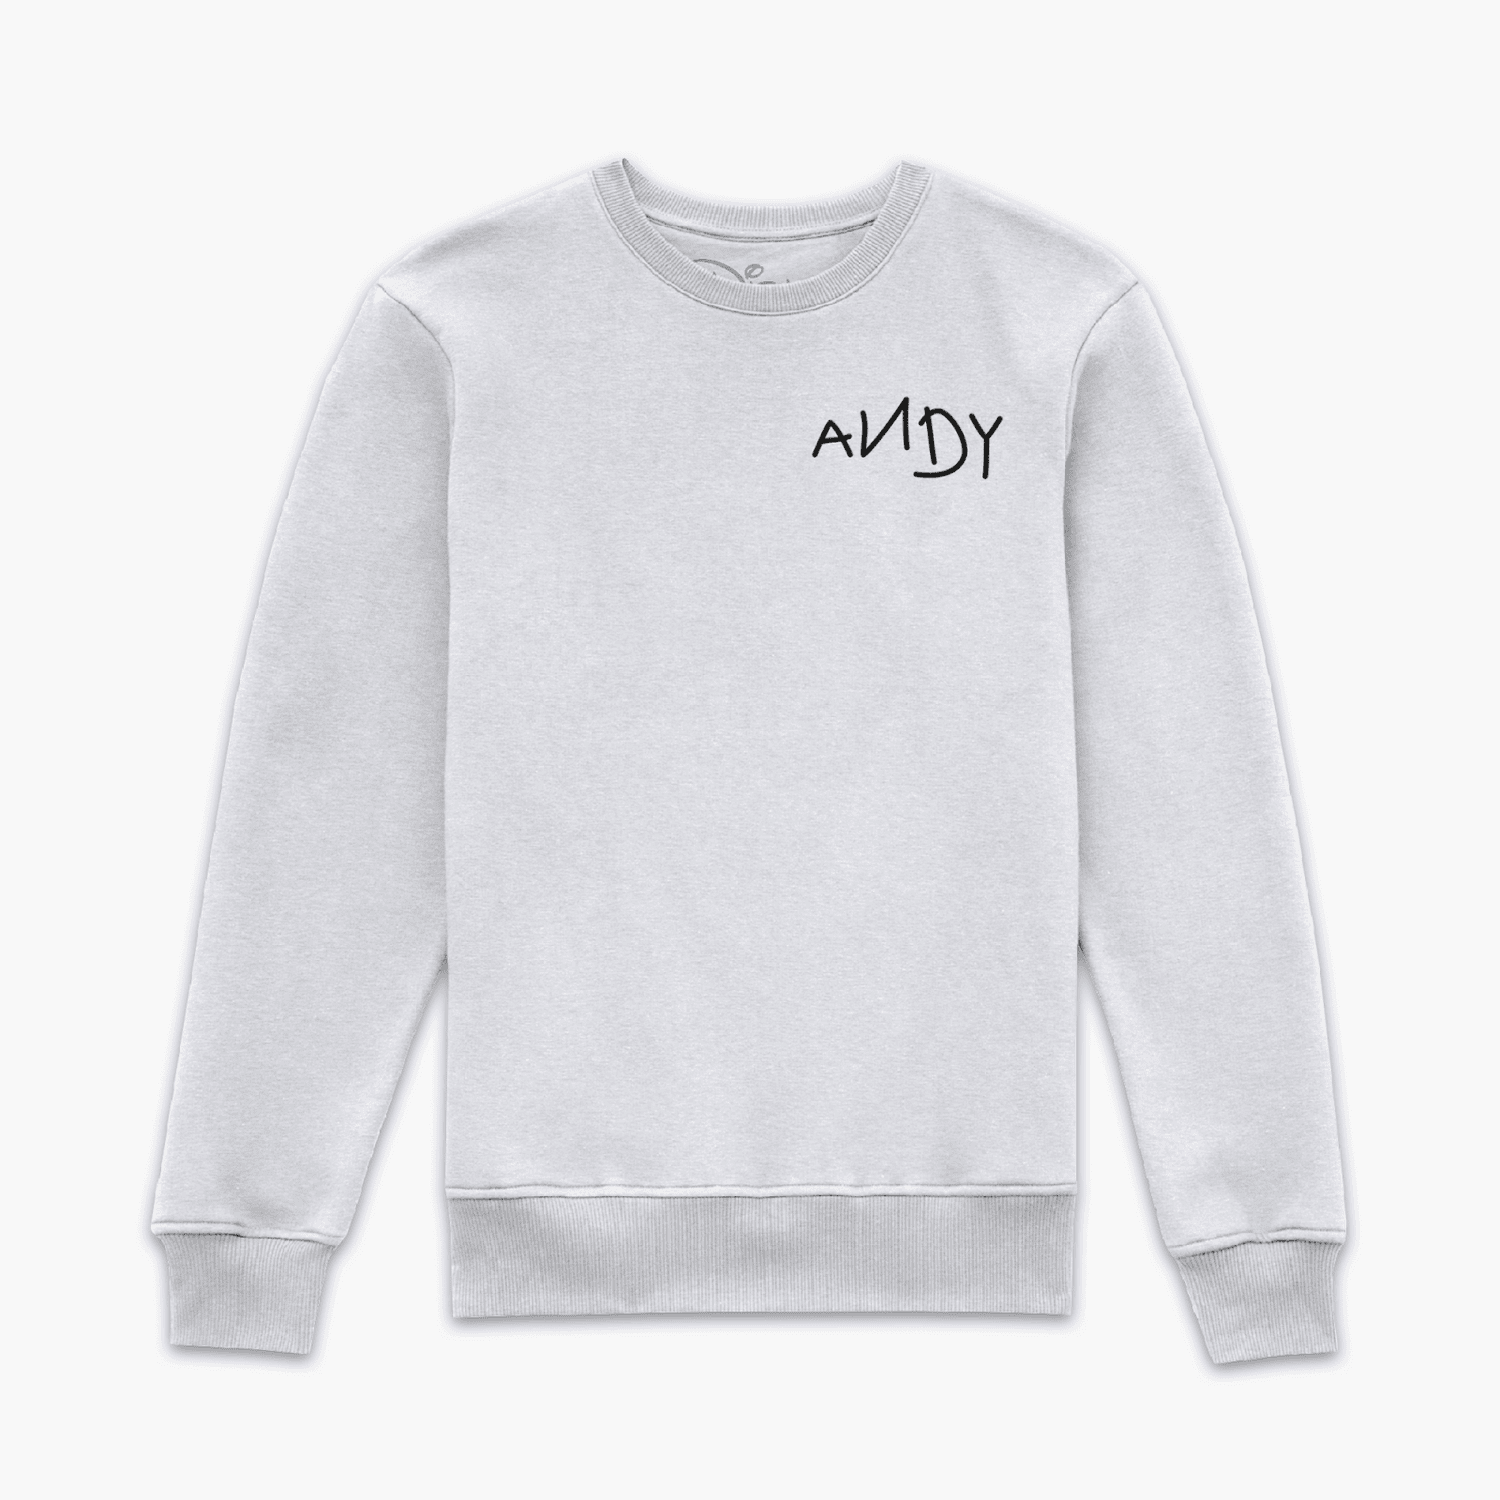 Toy Story Andy's Toy Collection Sweatshirt - White